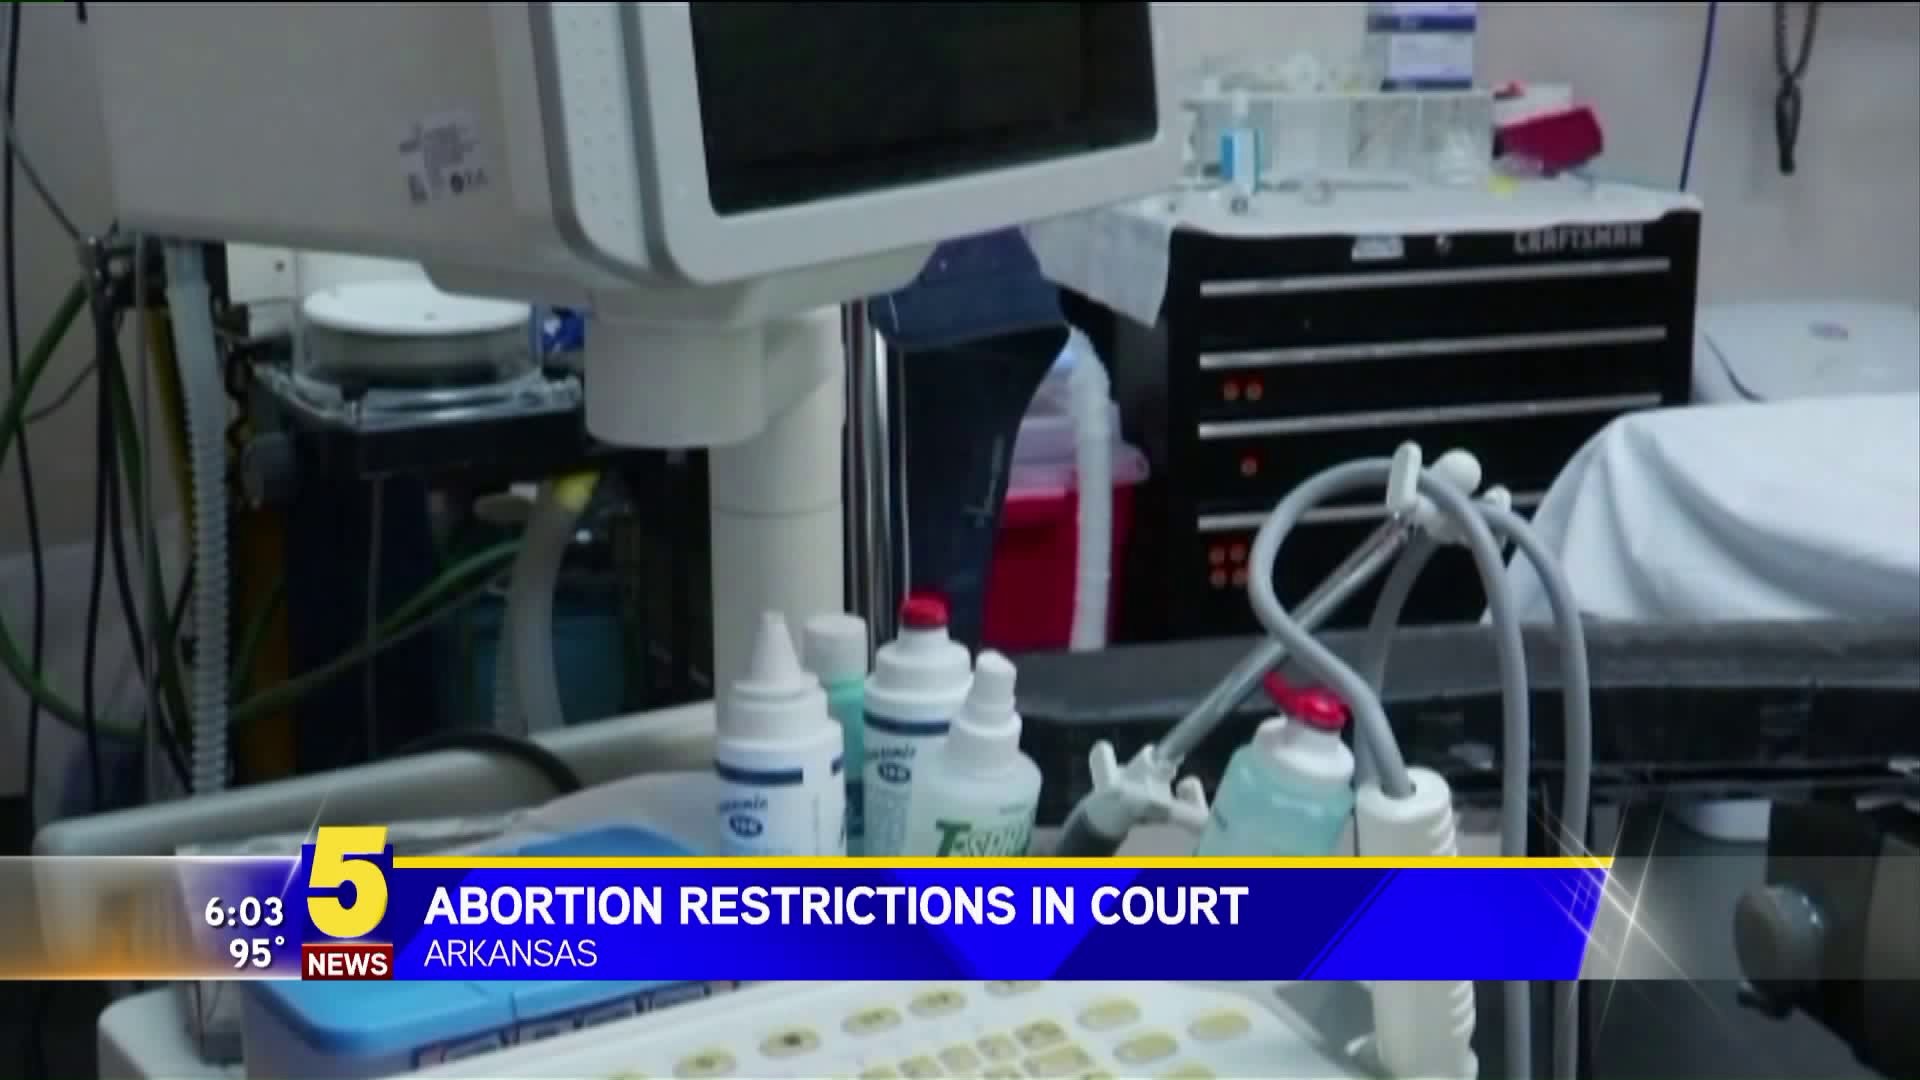 FEDERAL COURT HEARS ARGUMENTS ON ARKANSAS ABORTION LAWS